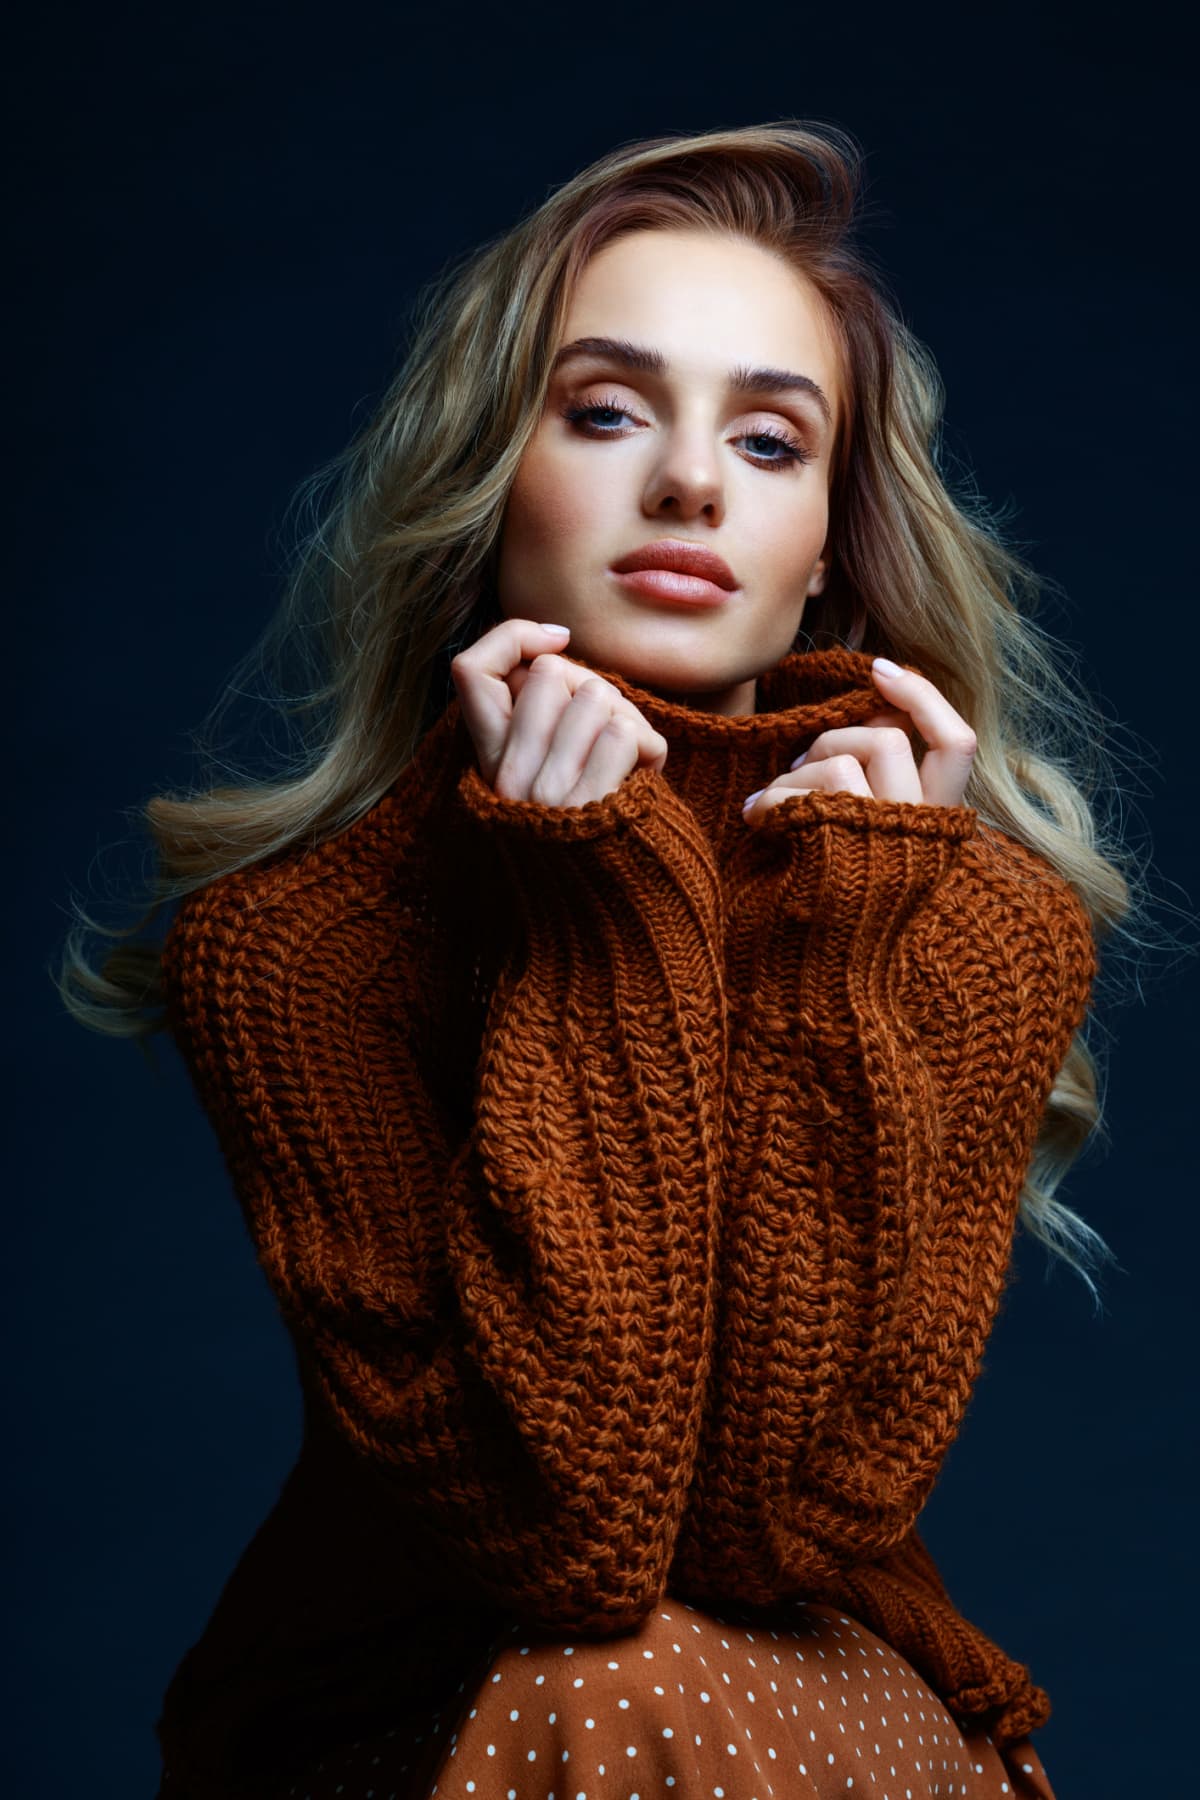 Beautiful woman with natural makeup, false eyelashes strikes a confident pose while wearing an oversized sweater 